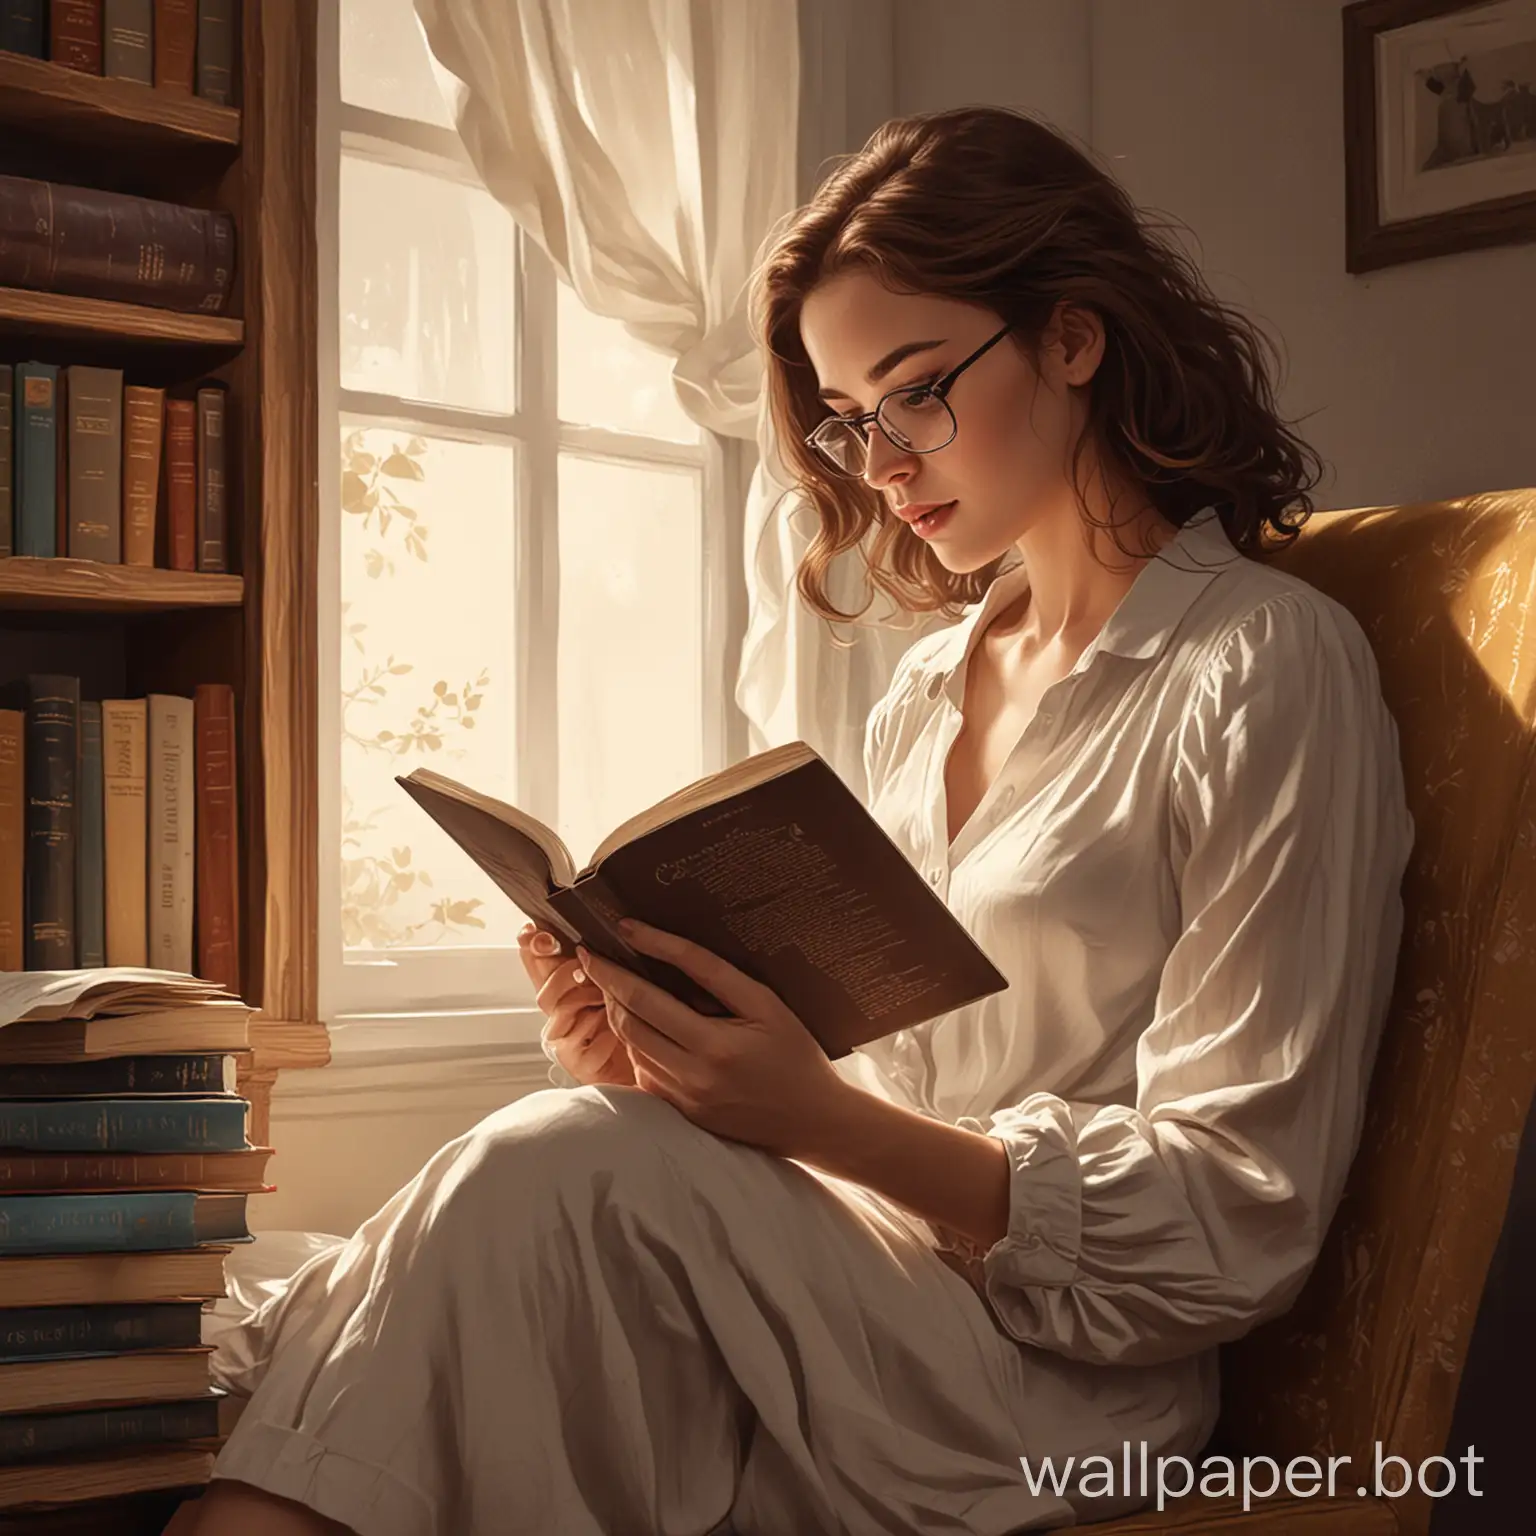 digital illustration of a woman reading book